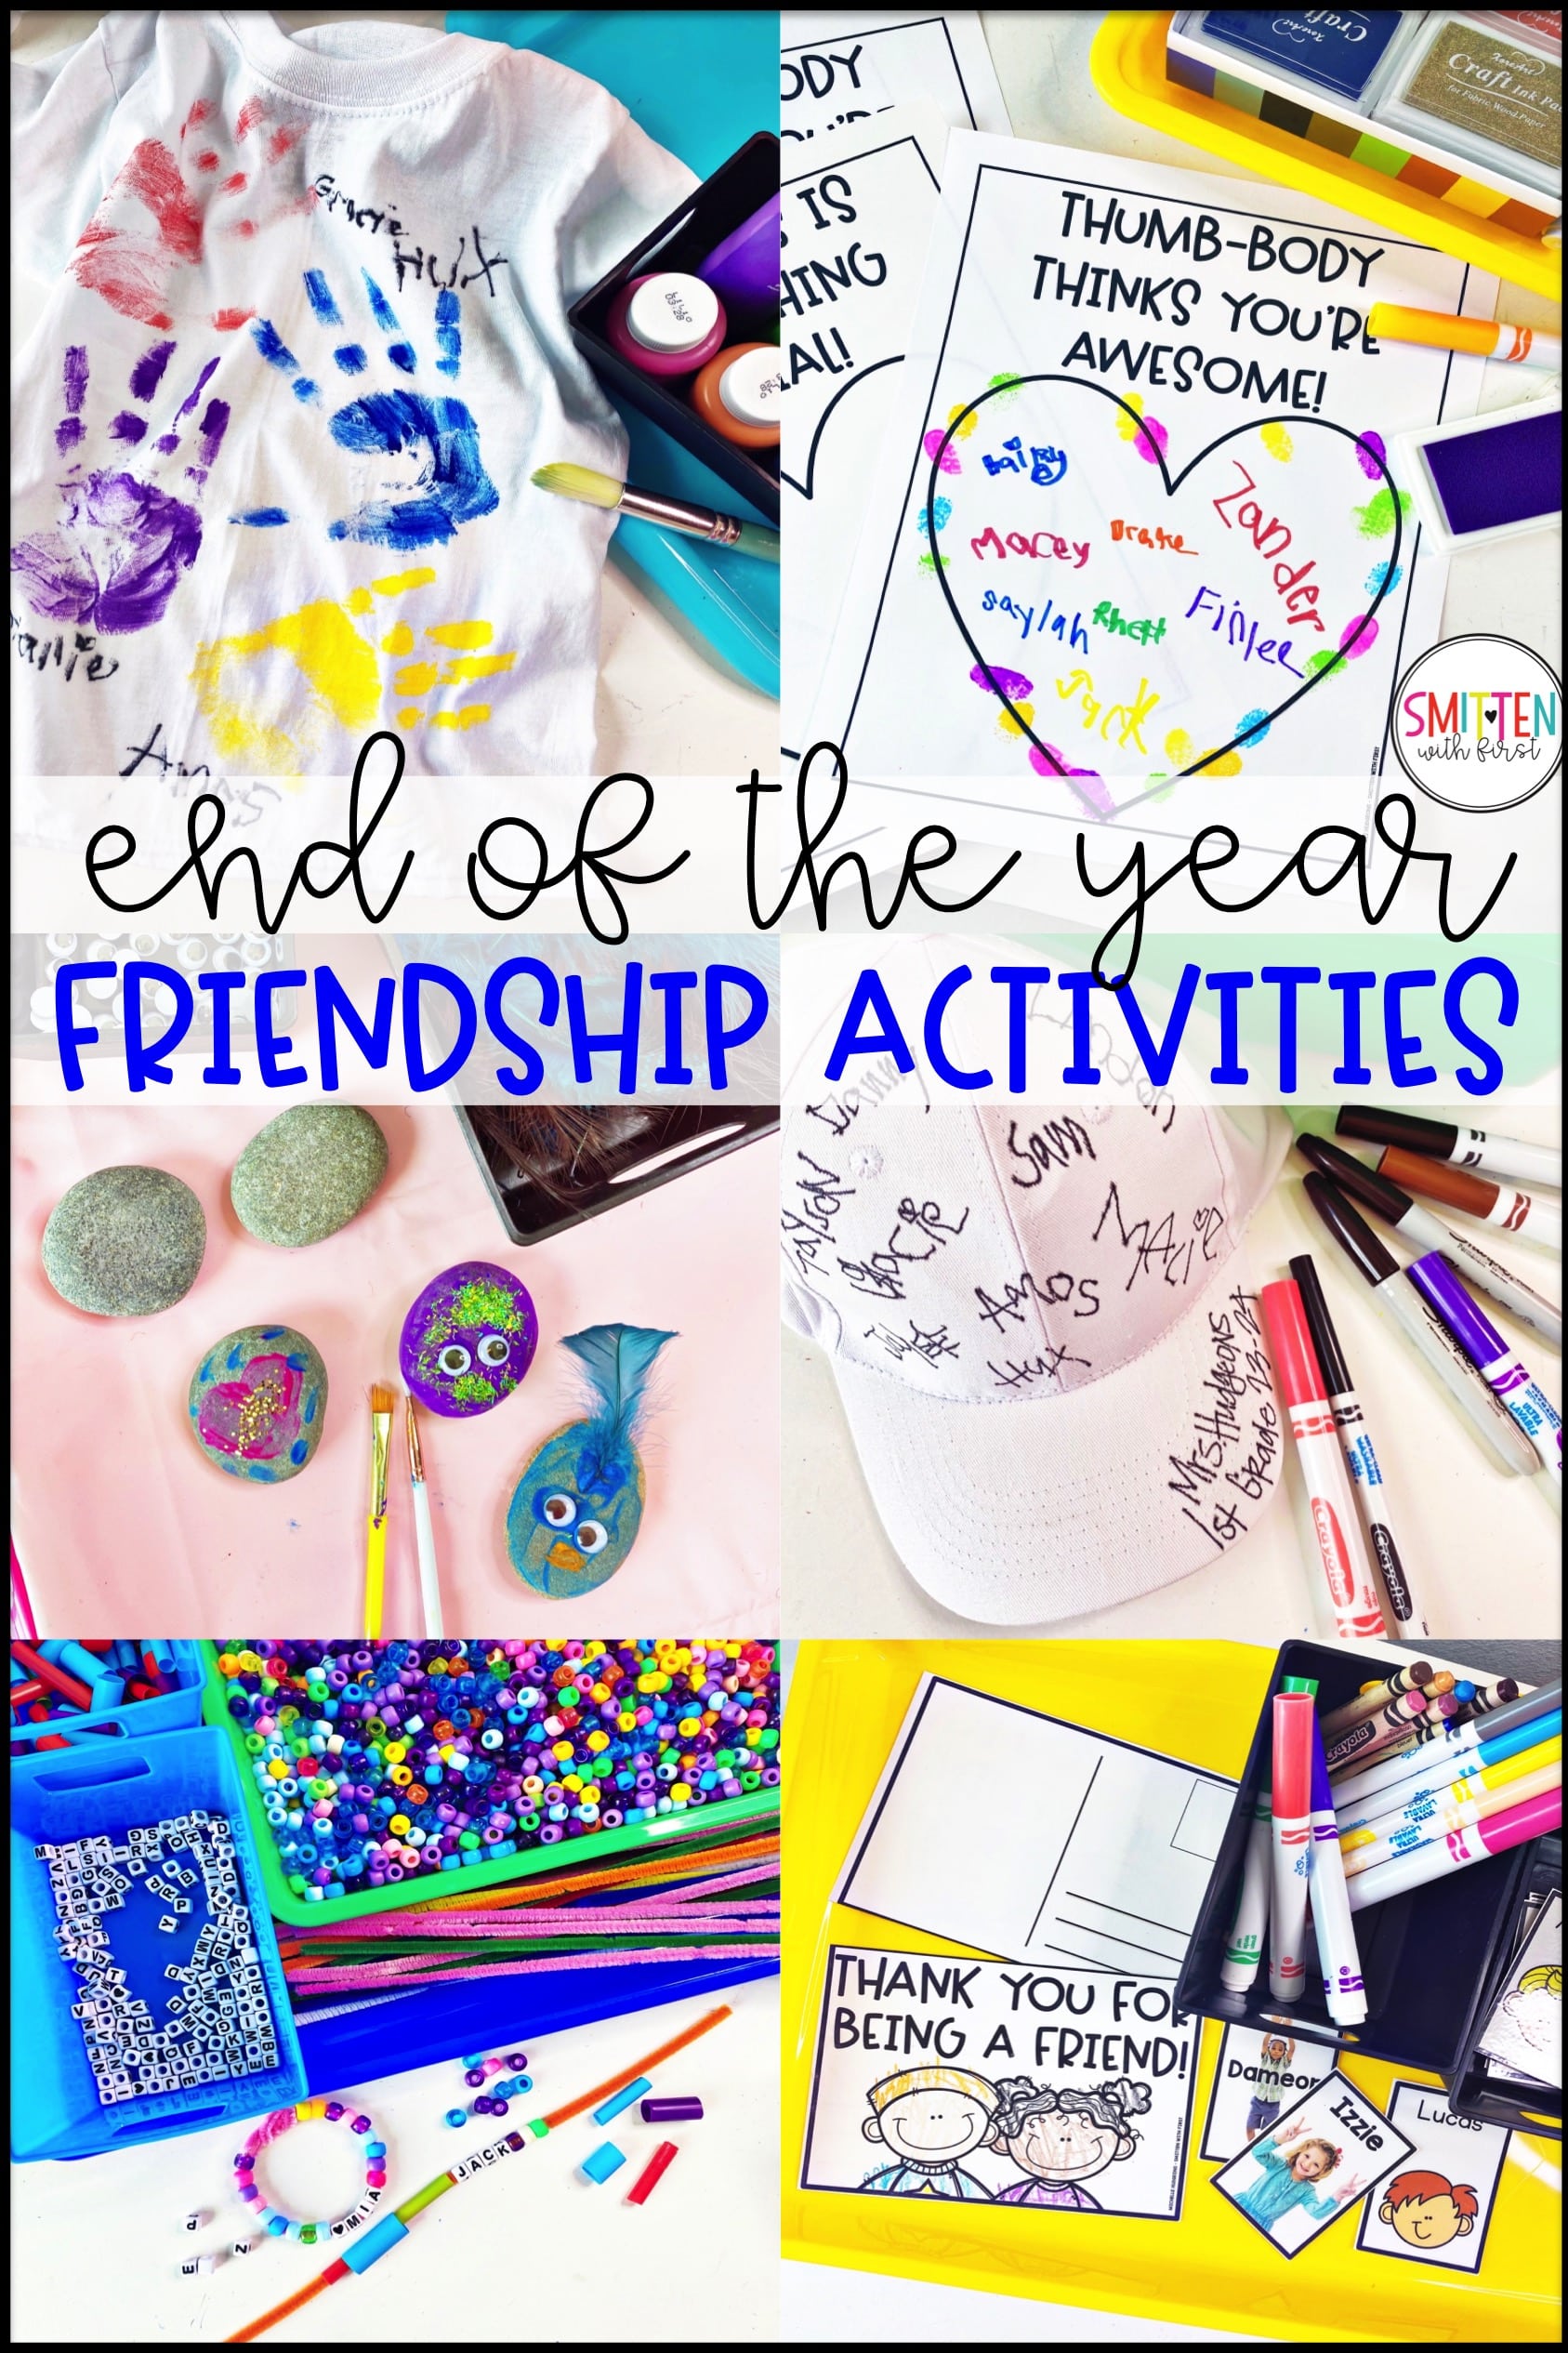 End of Year Friendship Activities